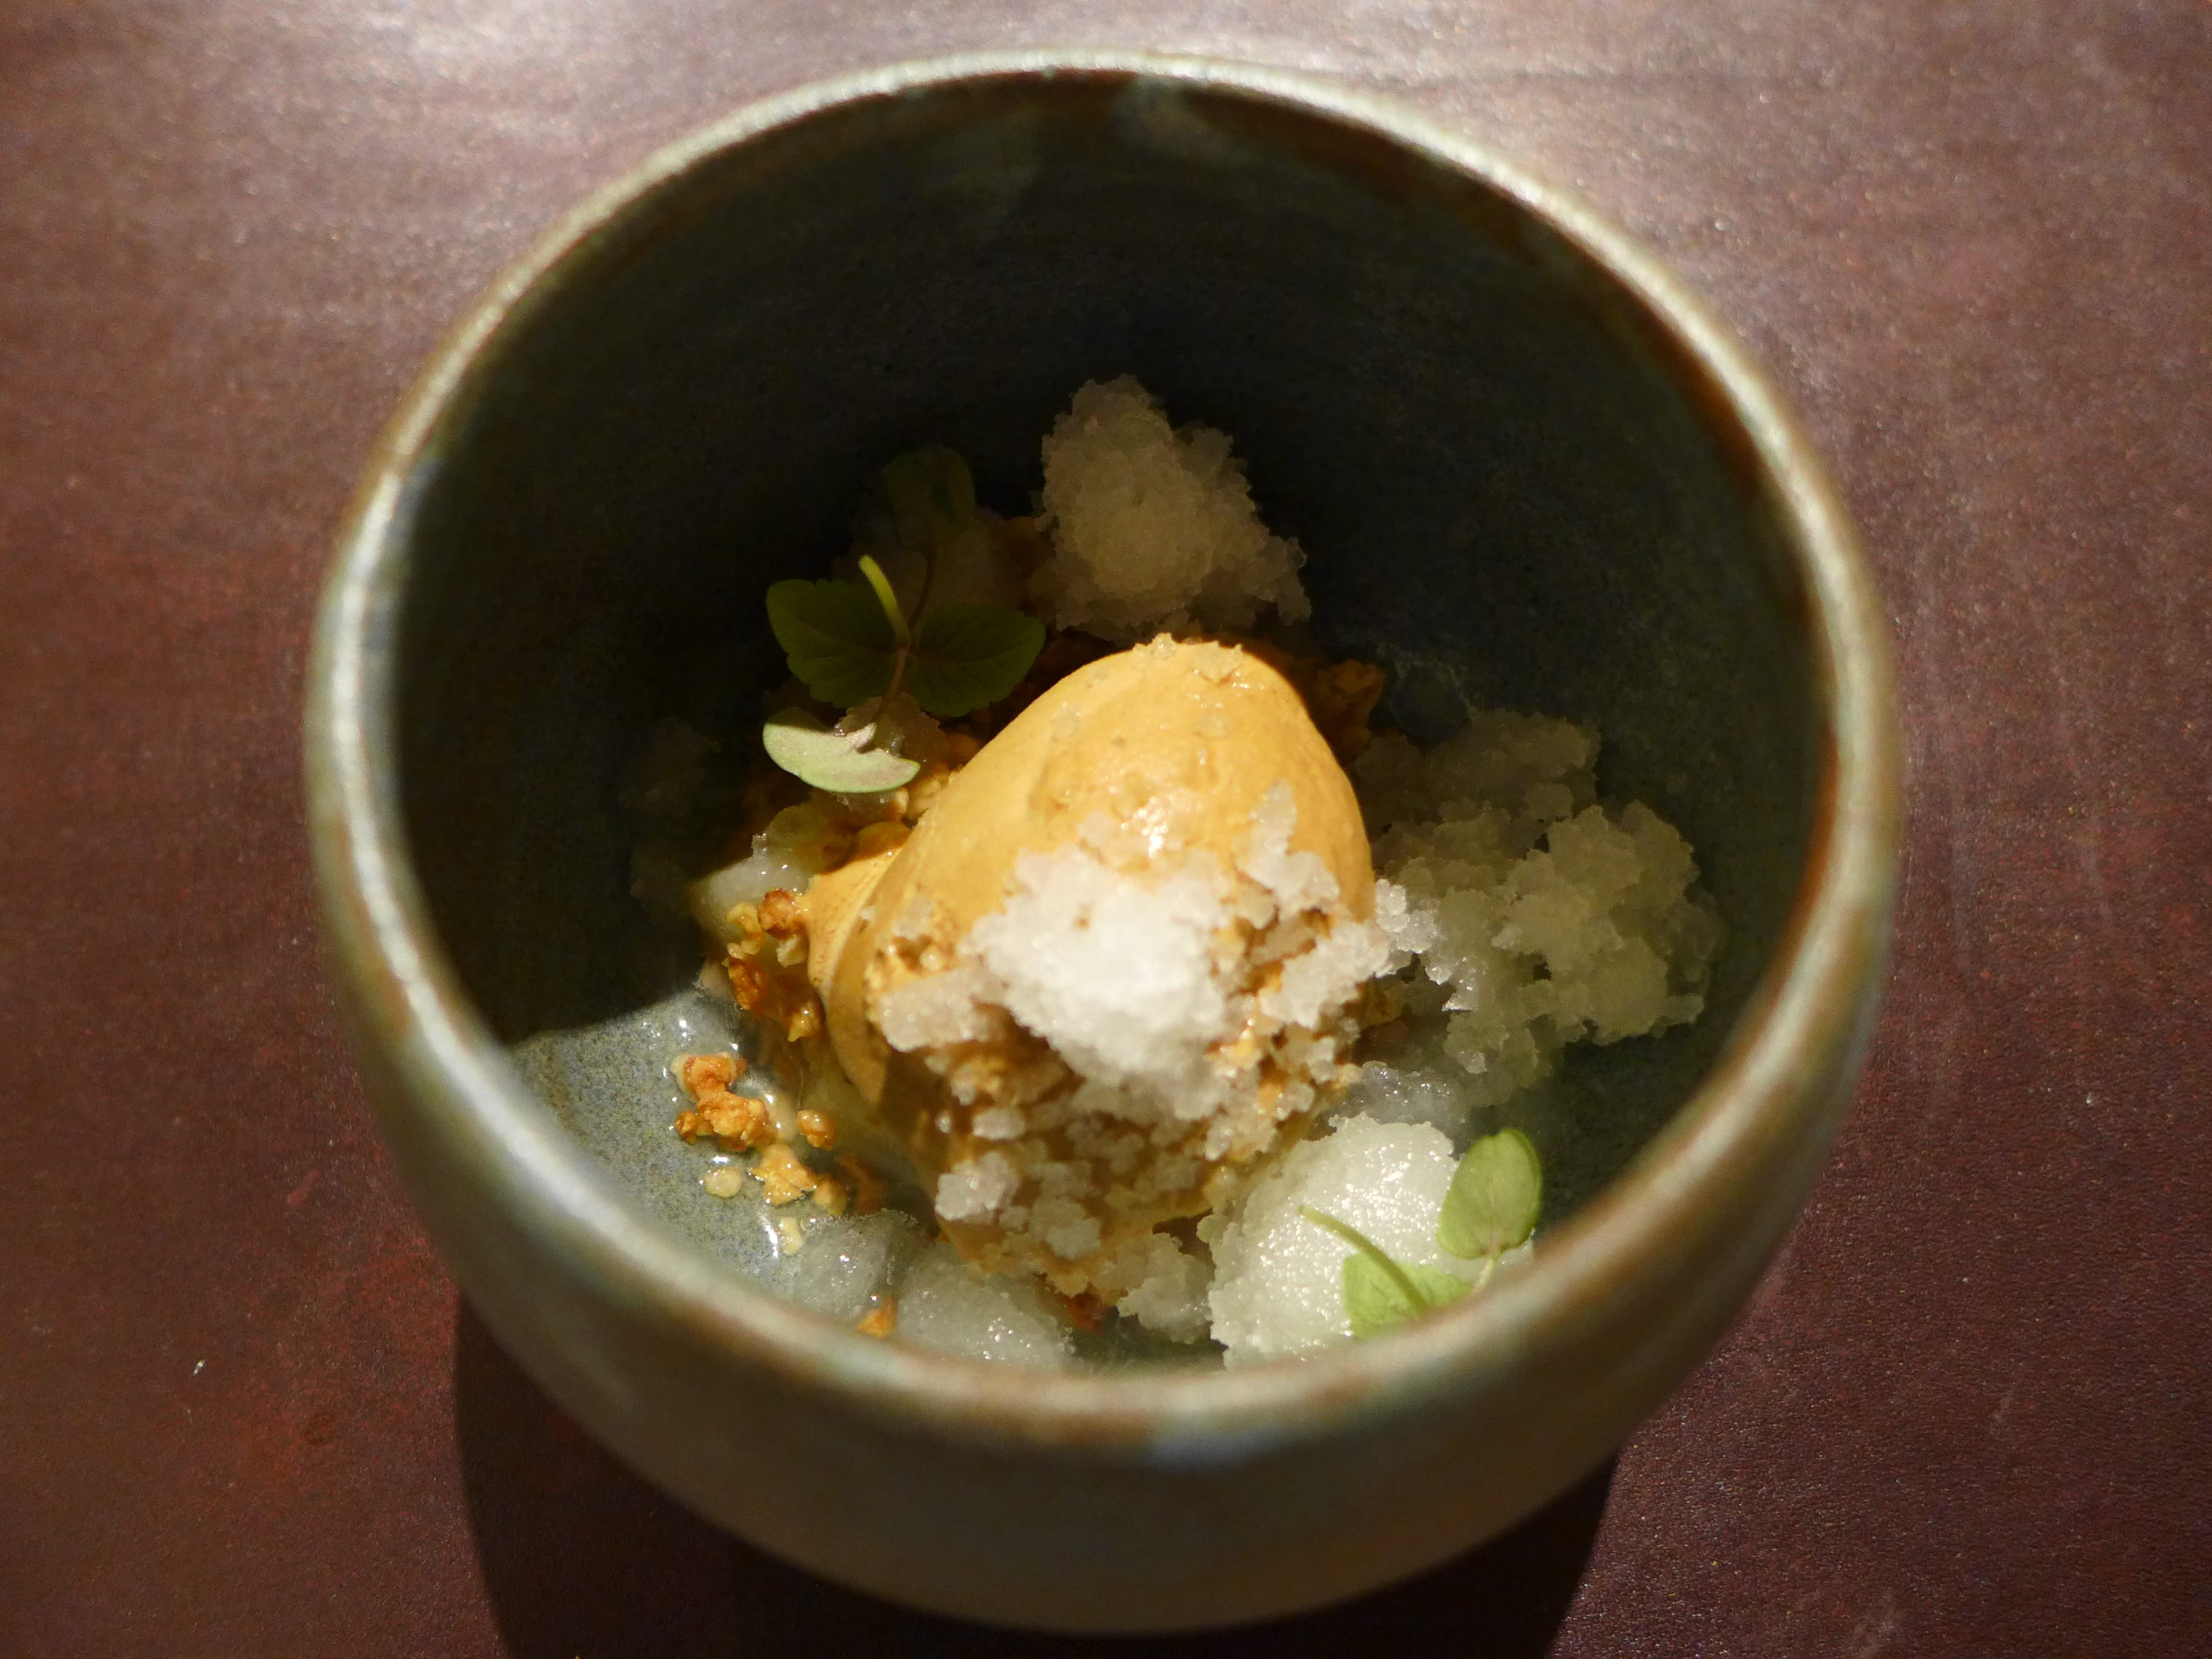 L'enclume - Pear, toasted oats and lactose